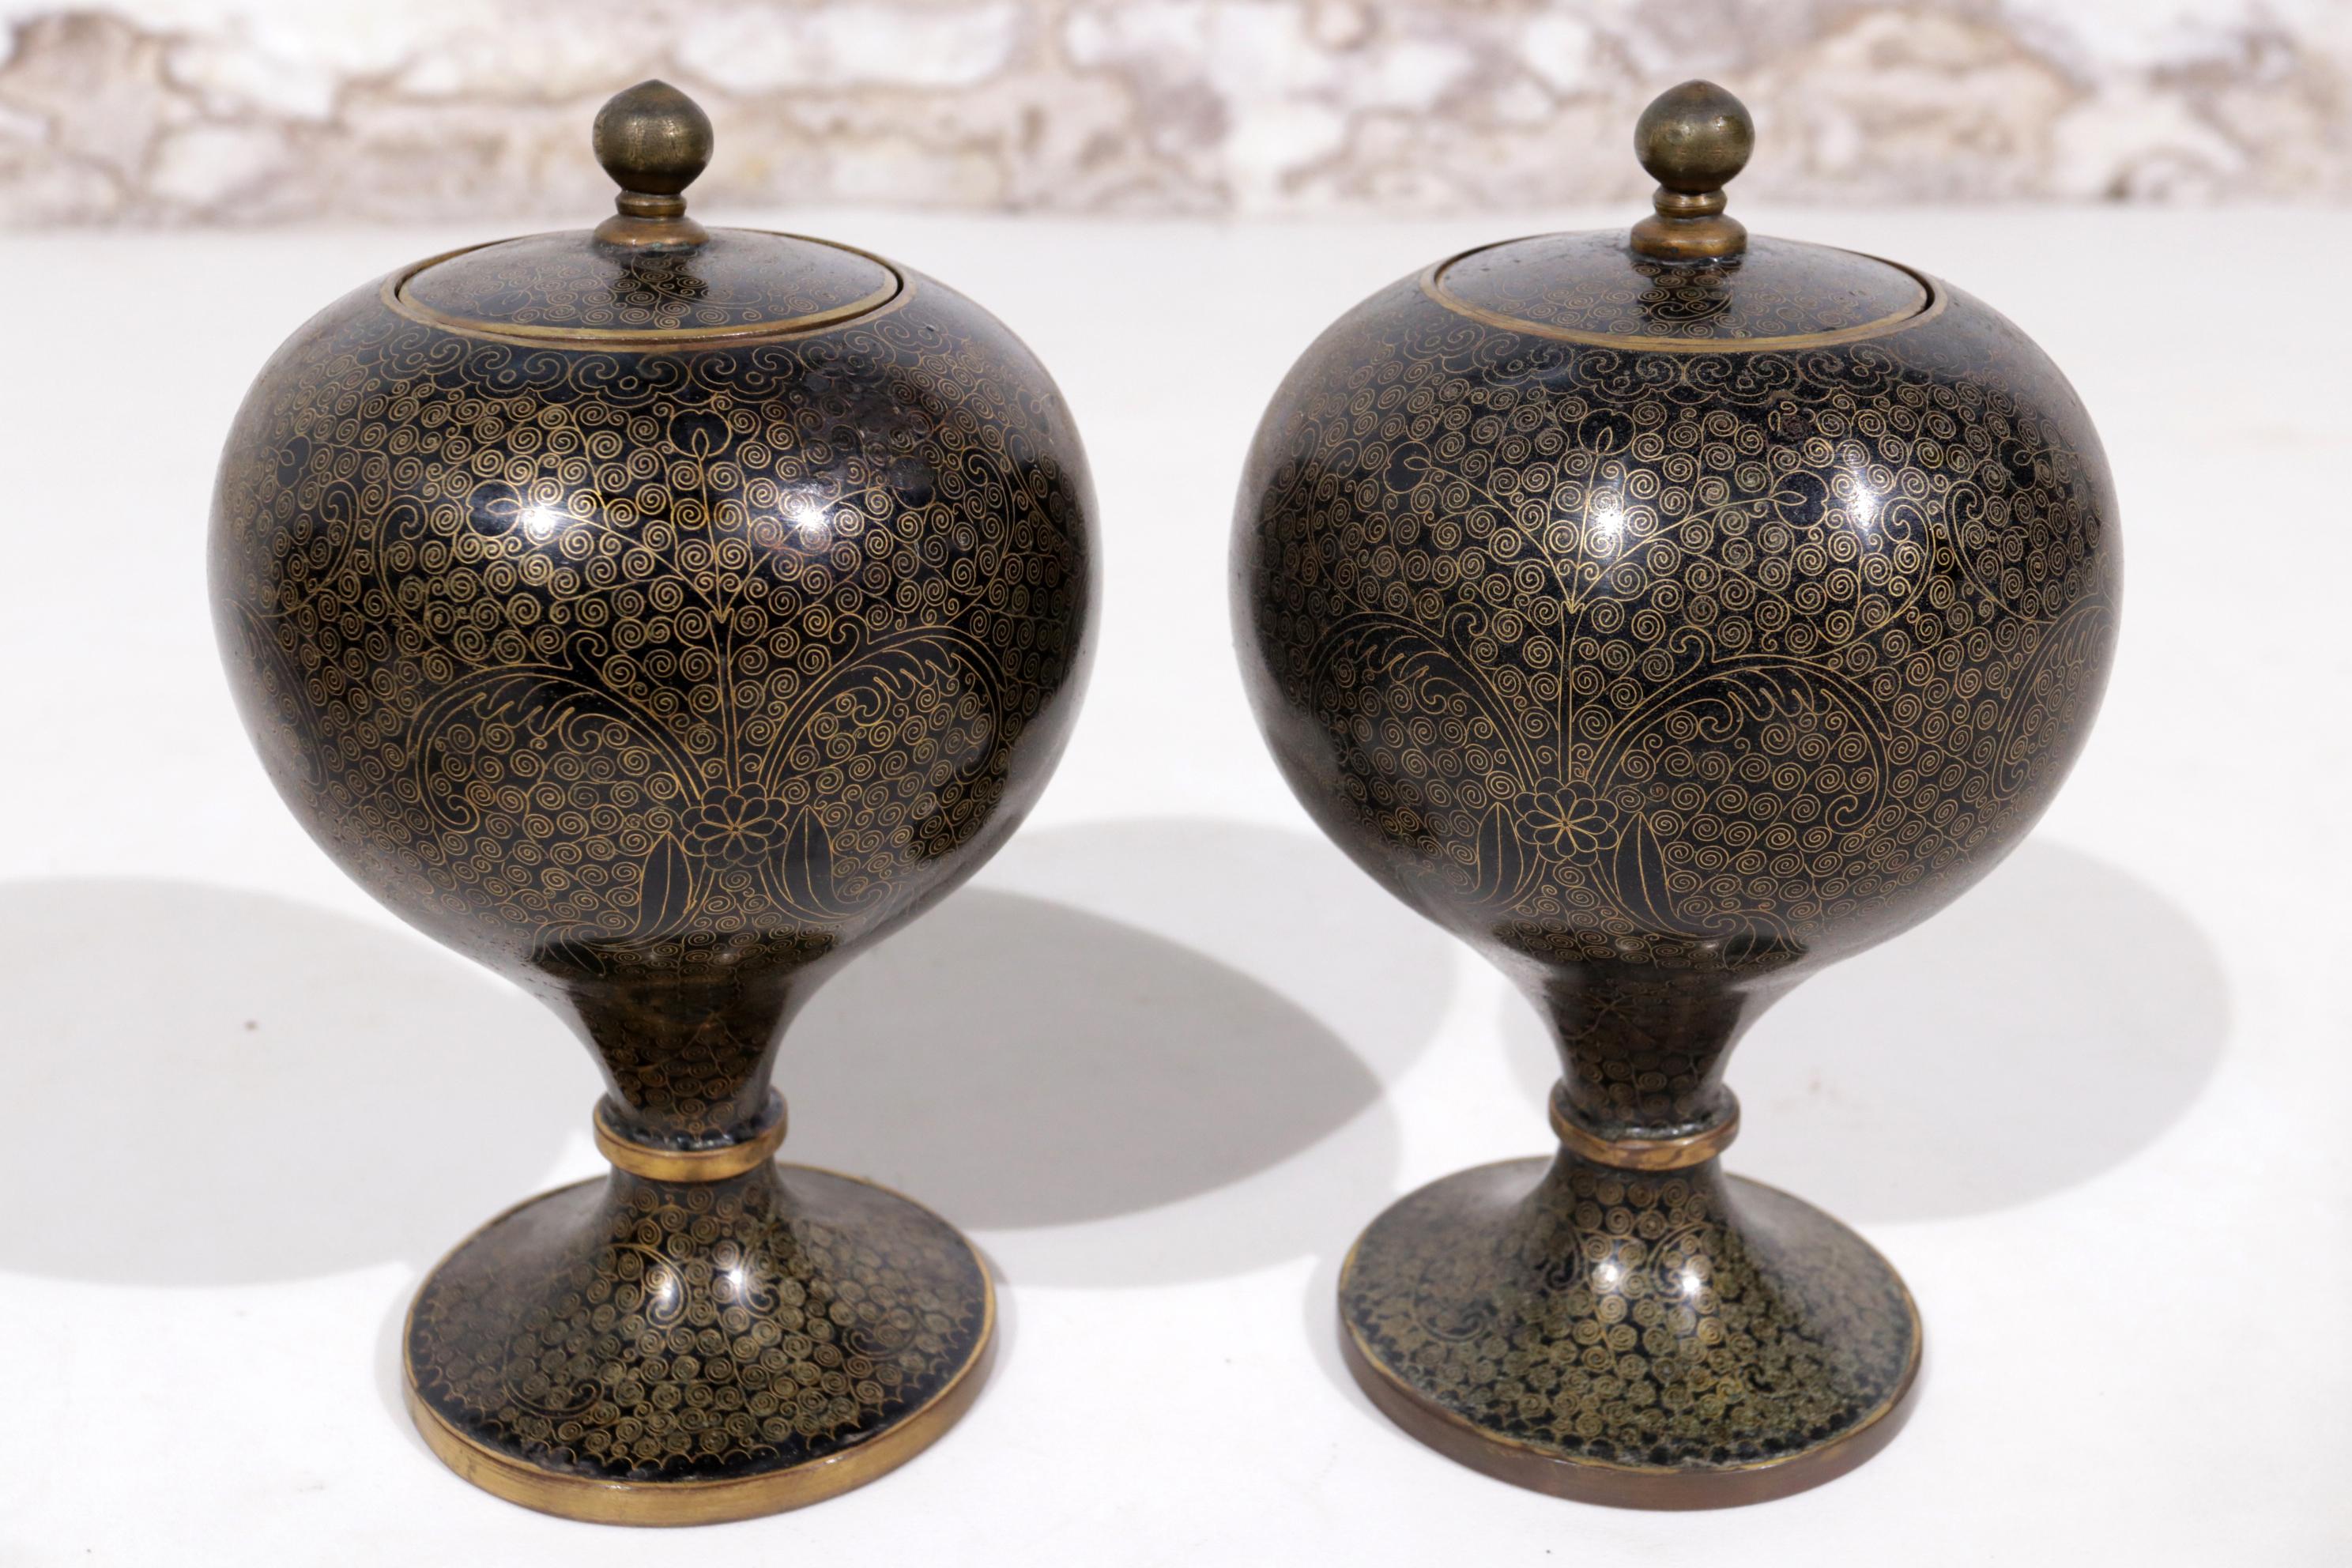 Very decorative Chinese cloisonne enamel jars and covers, early 20th century.
each of globular form on a tapering stem and circular foot.
Gold / black and rich blue inside.